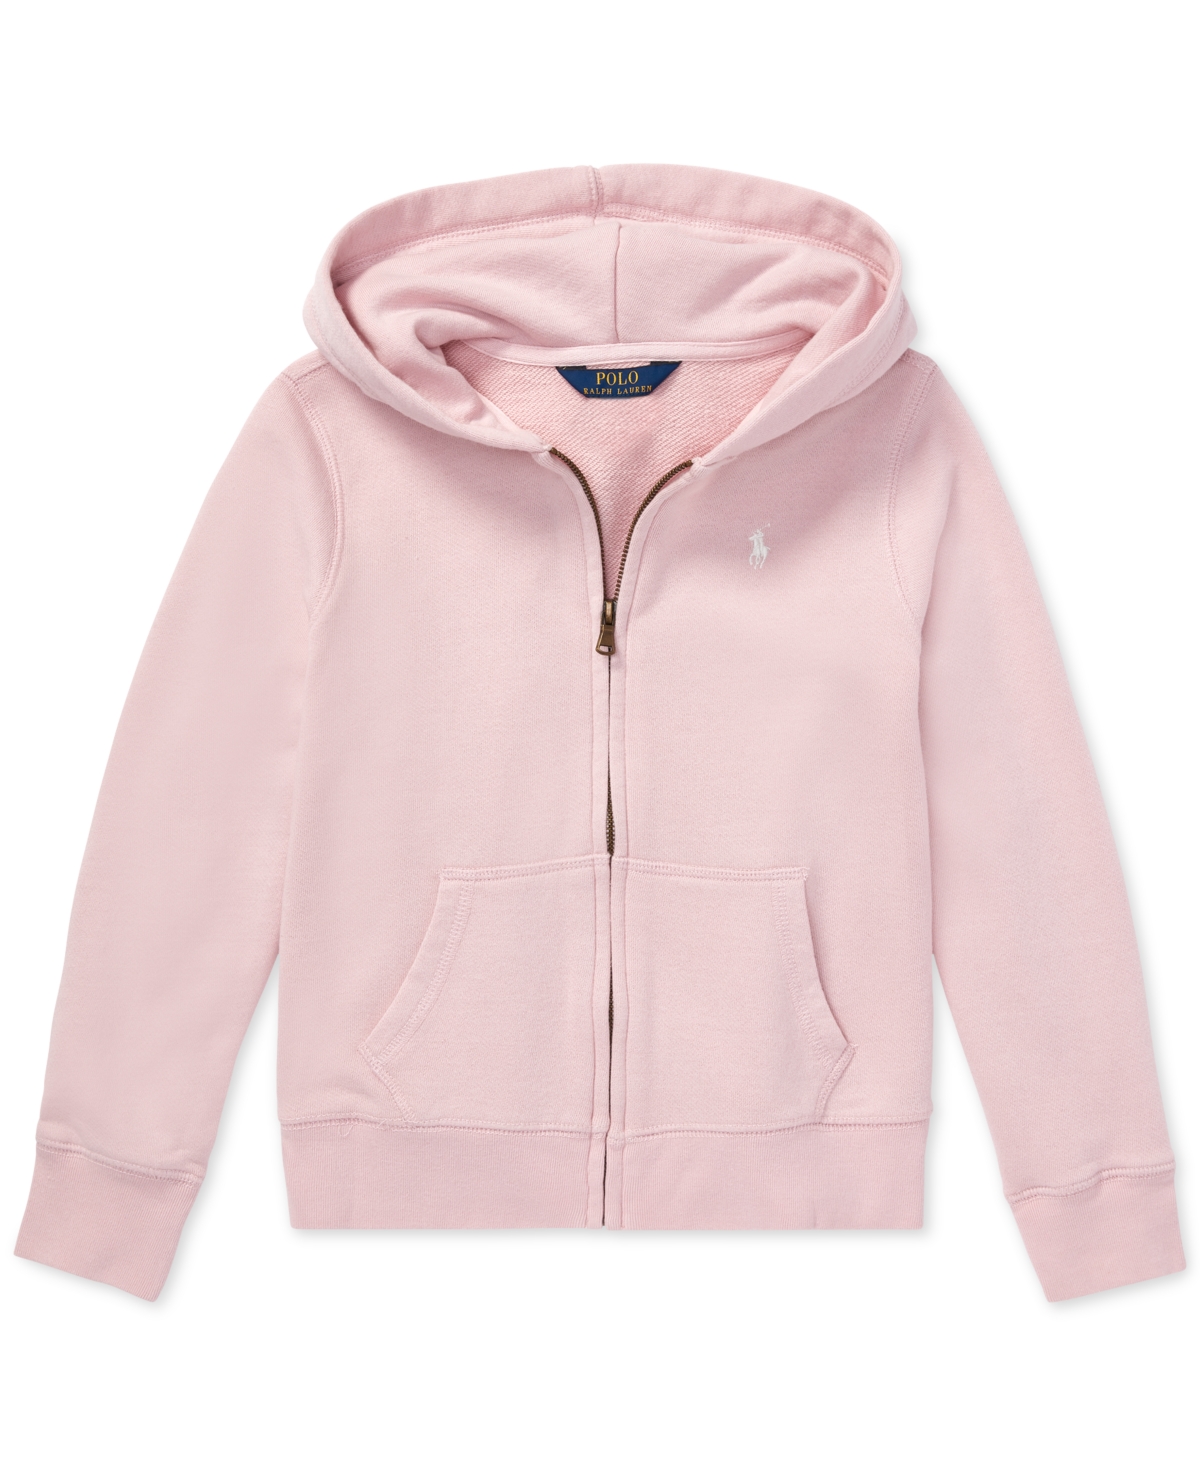 Big Girls French Terry Hoodie